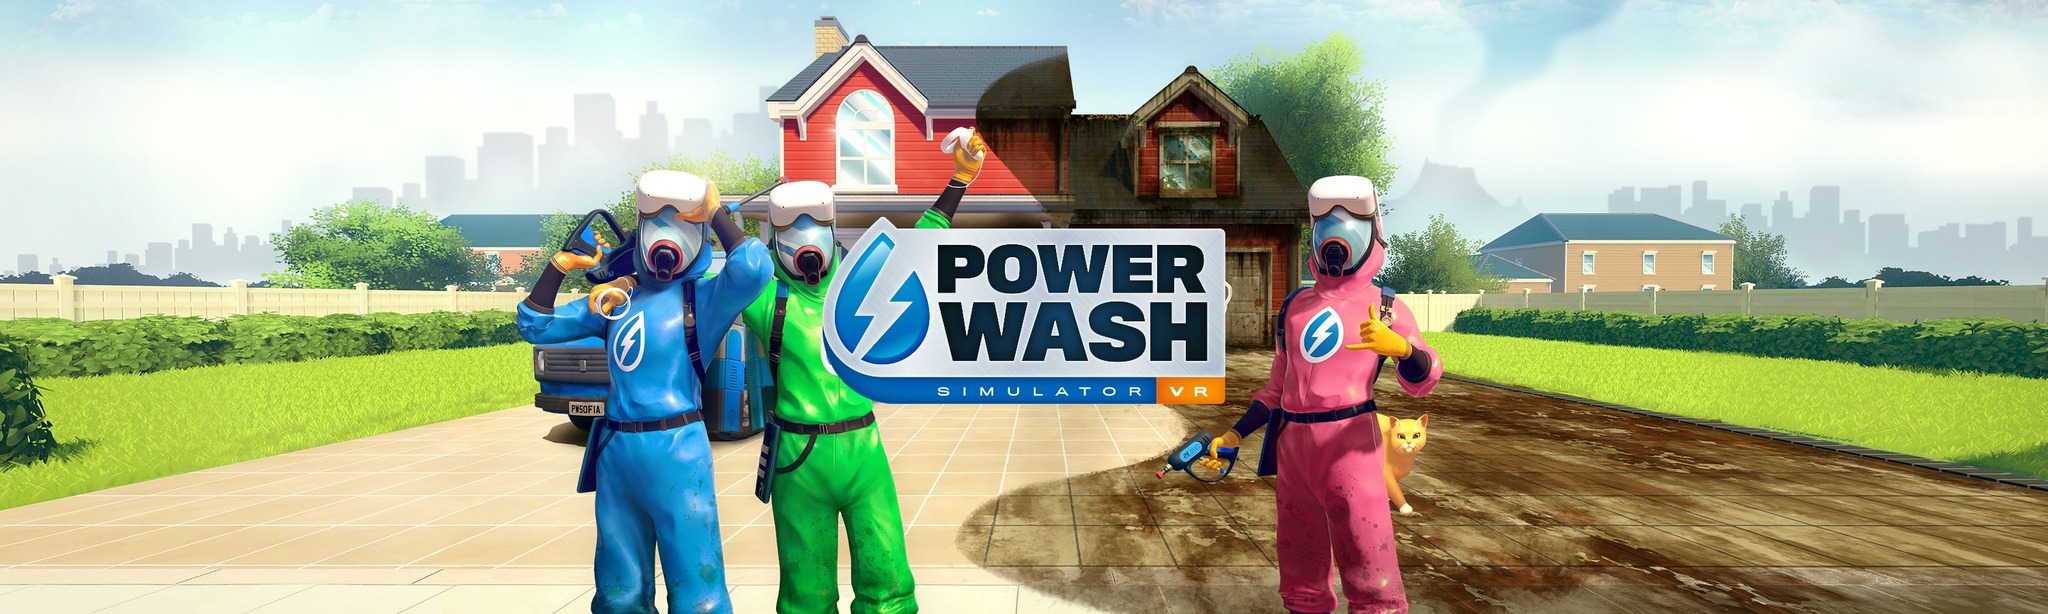 PowerWash Simulator VR to Launch on Meta Quest Headsets, Expanding the  Cleaning Experience 